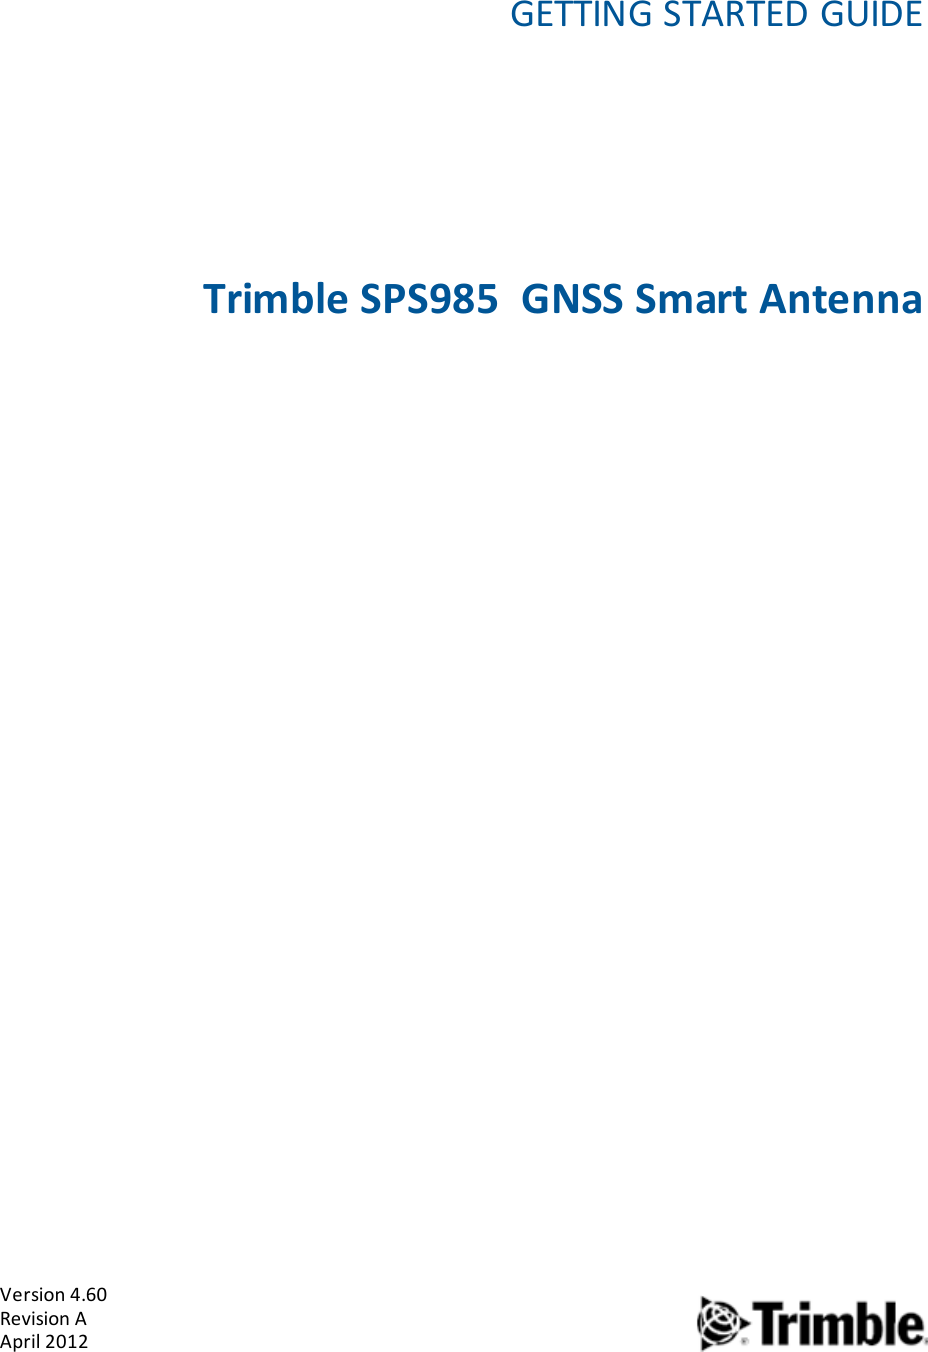 Version 4.60Revision AApril 20121GETTING STARTED GUIDETrimble SPS985 GNSS Smart Antenna1